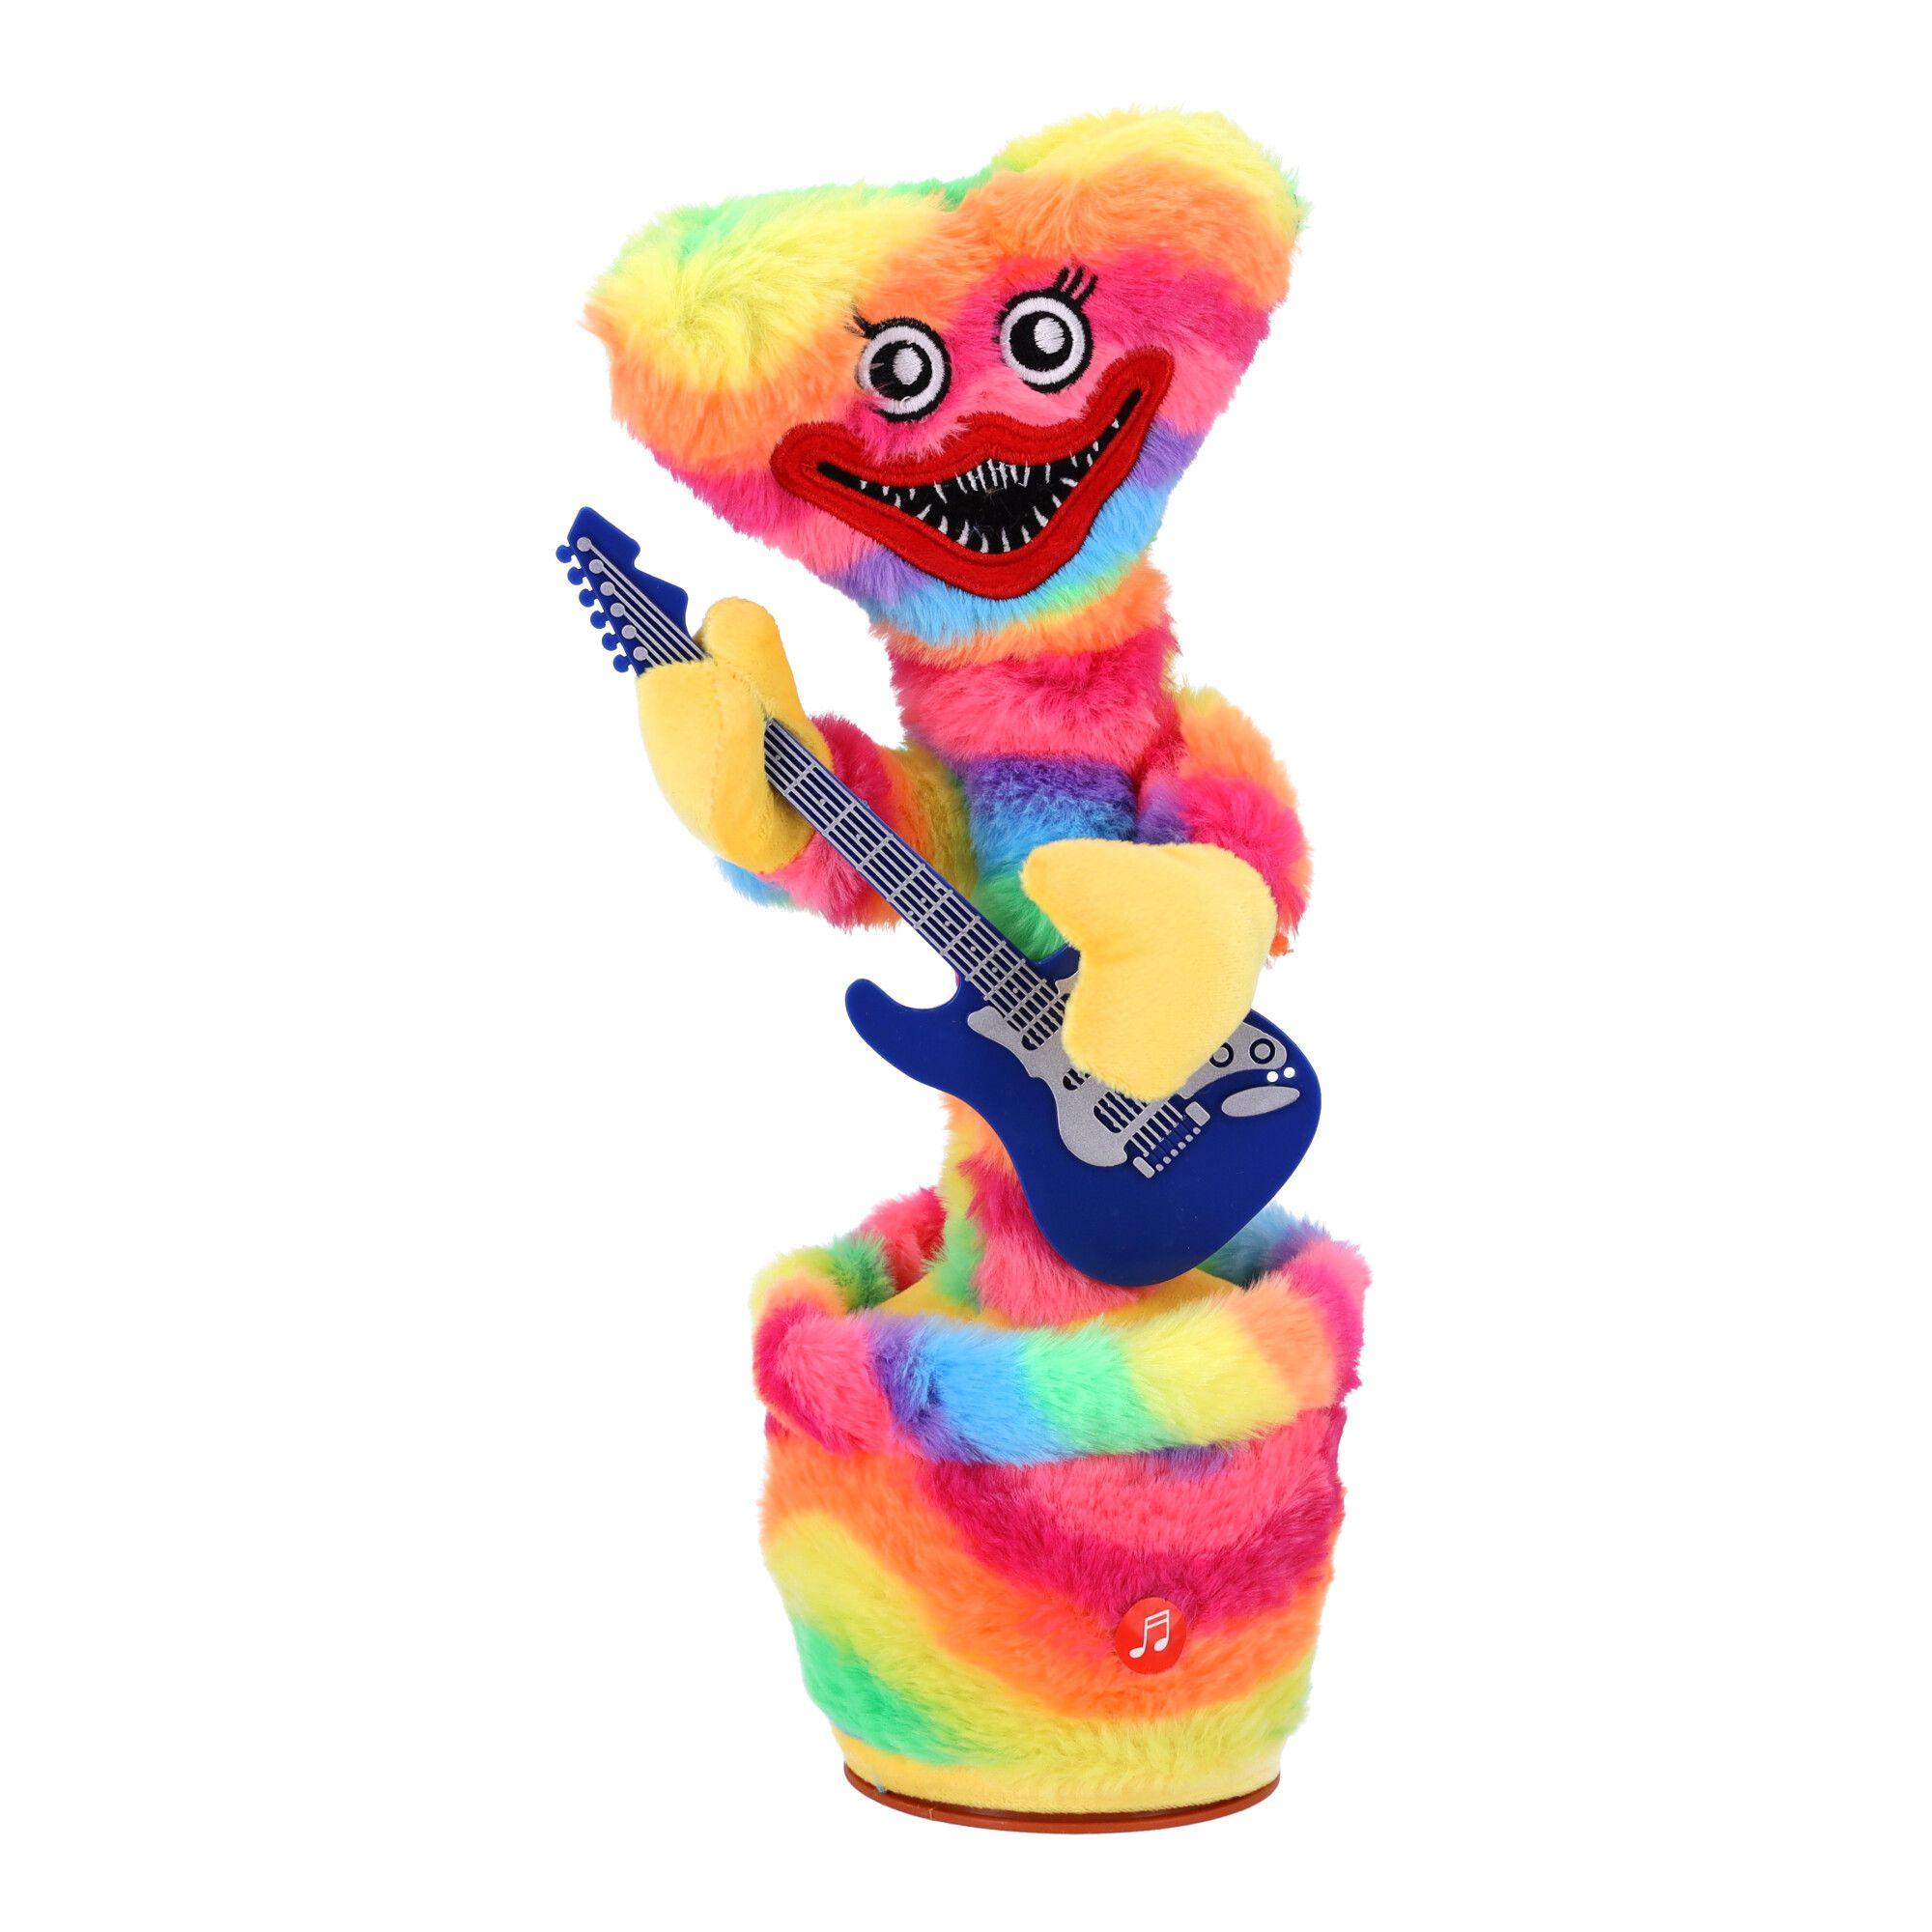 Children's toy - Dancing and singing Huggy Wuggy - rainbow.